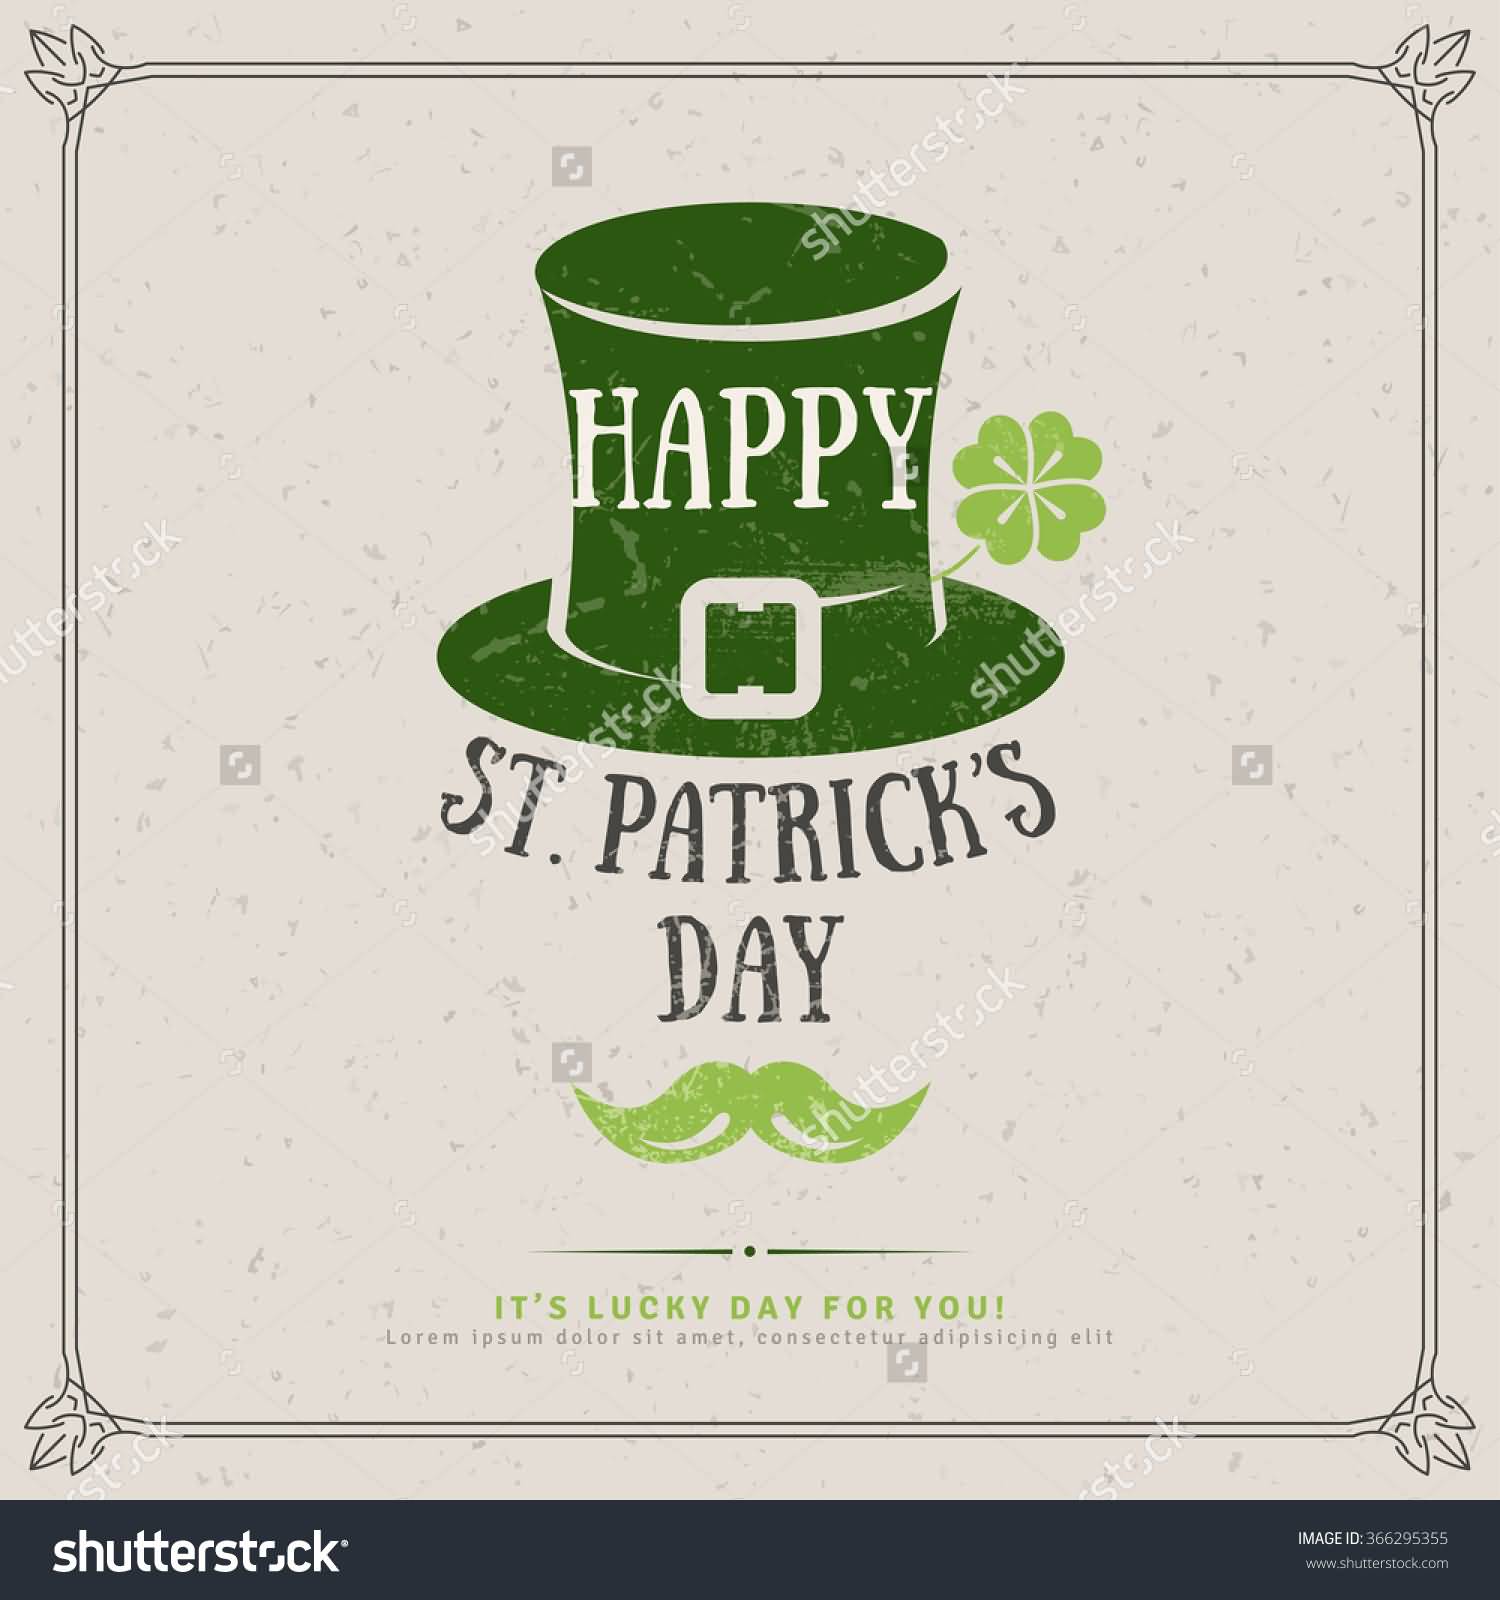 Happy Saint Patrick's Day It's Lucky Day For You Greeting Card